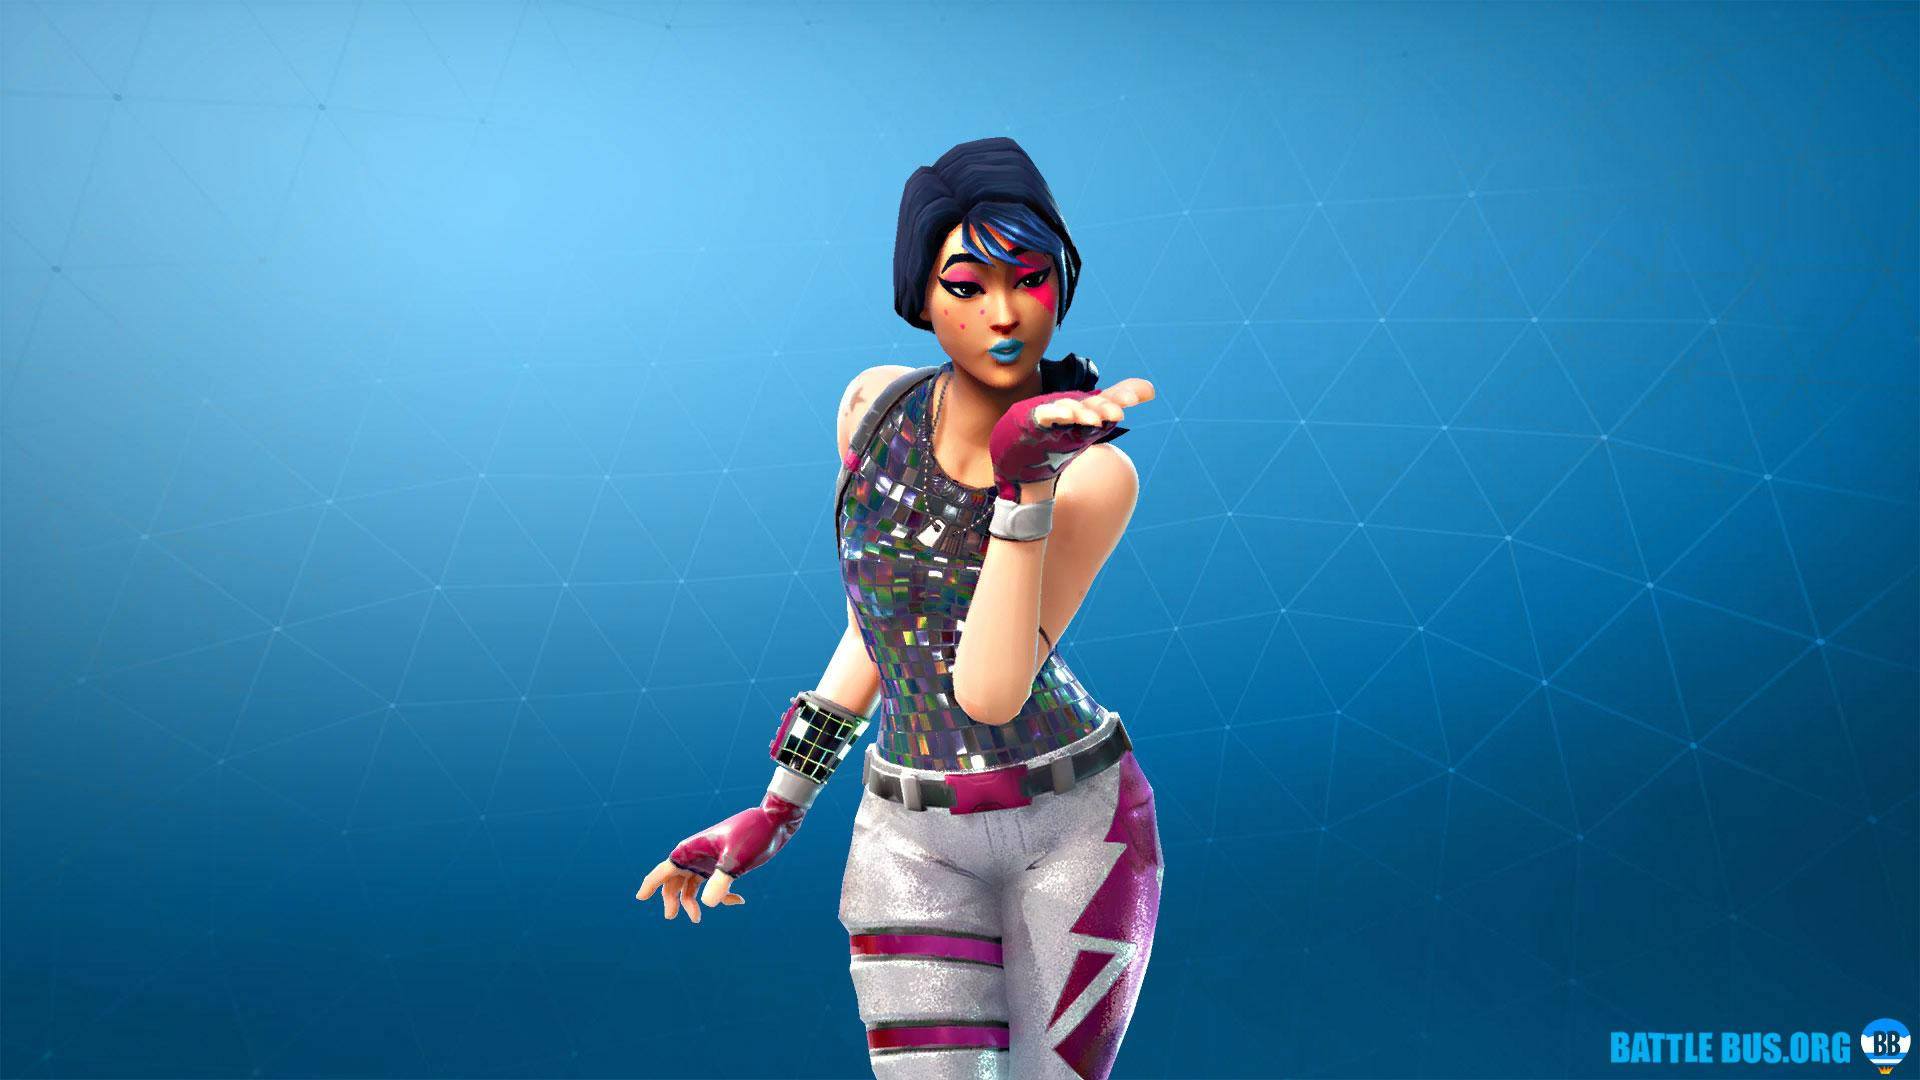 Shine with the Sparkle Specialist outfit in Fortnite Wallpaper